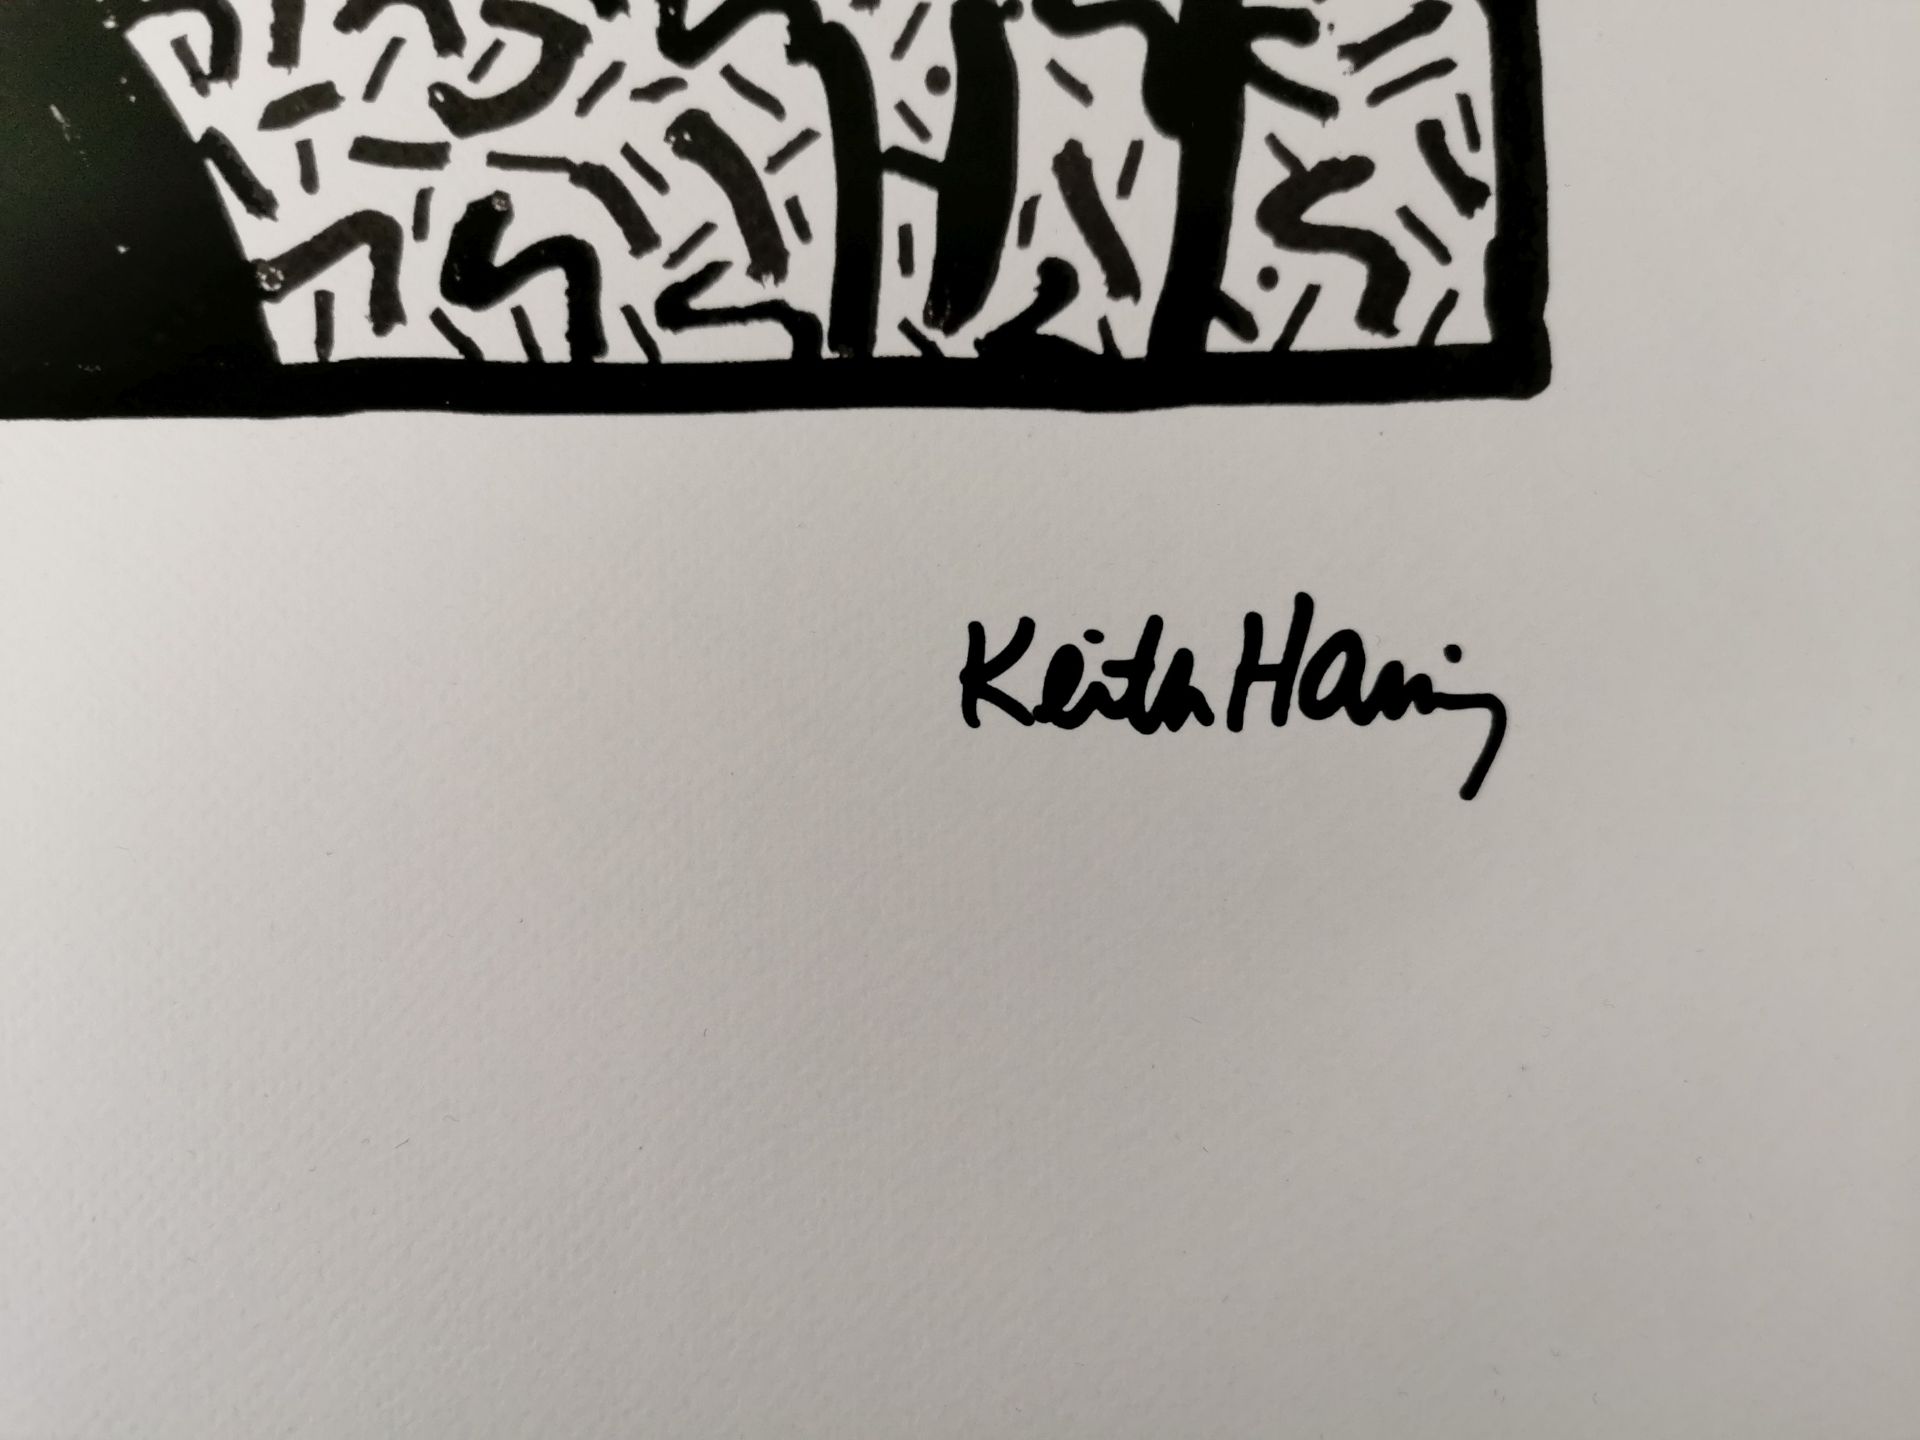 GRAPHICS AFTER KEITH HARING - Image 2 of 3